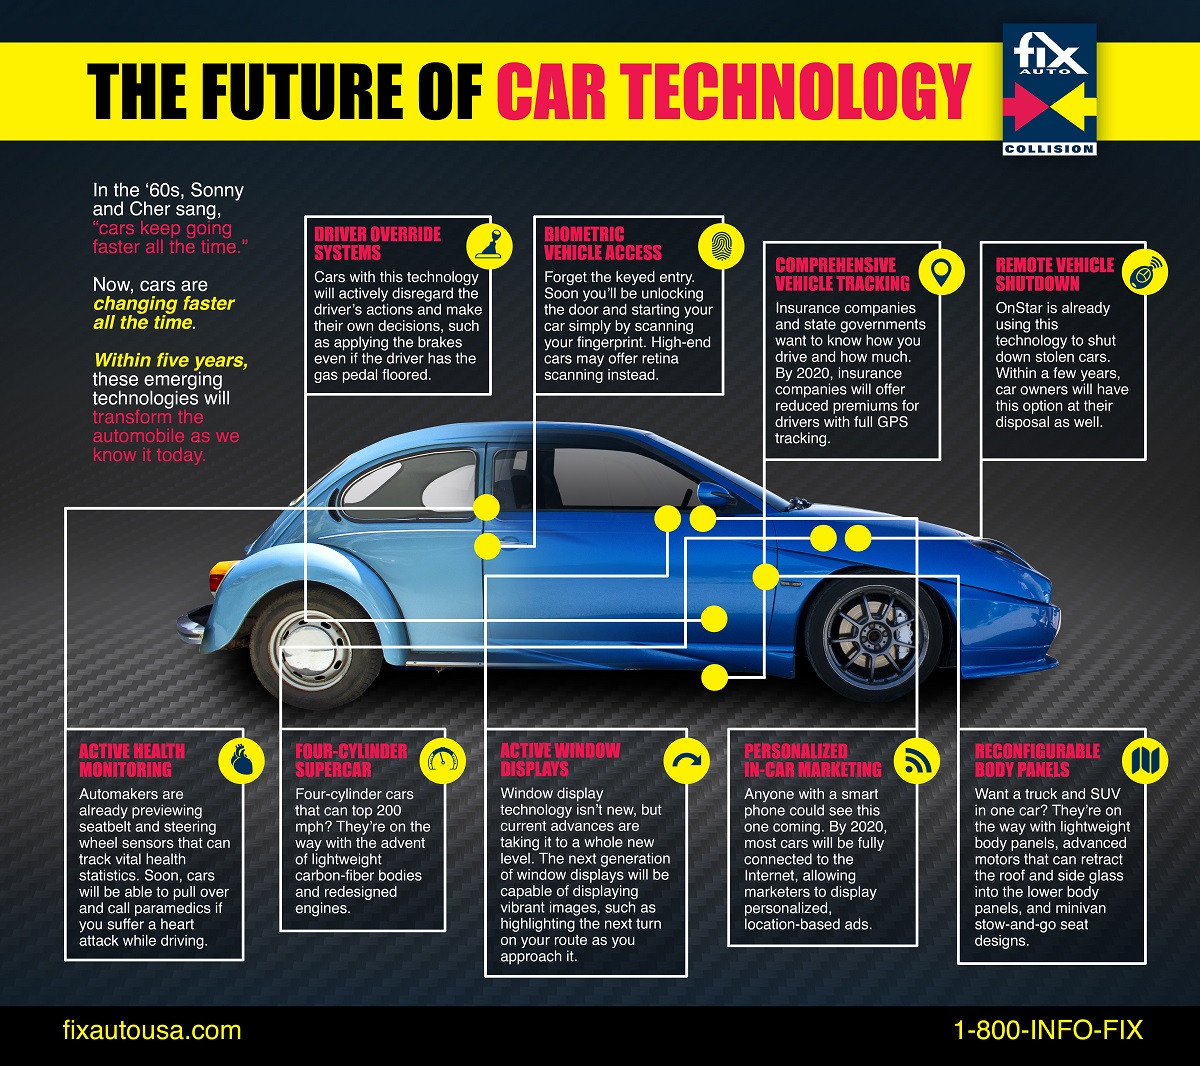 The Future of Car Technology